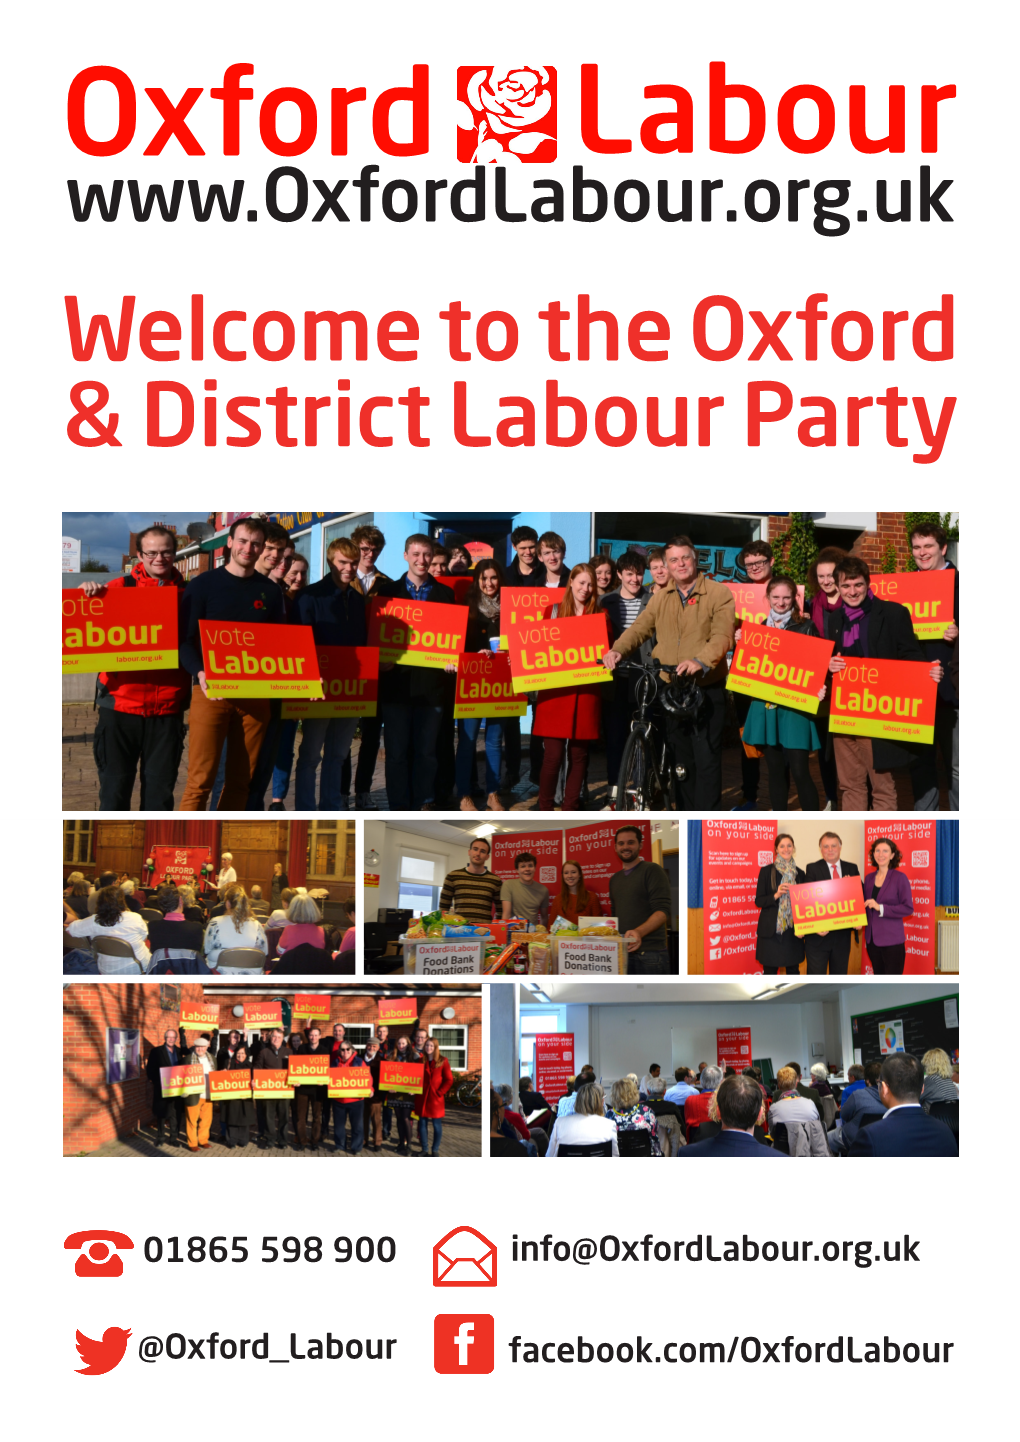 The Oxford & District Labour Party